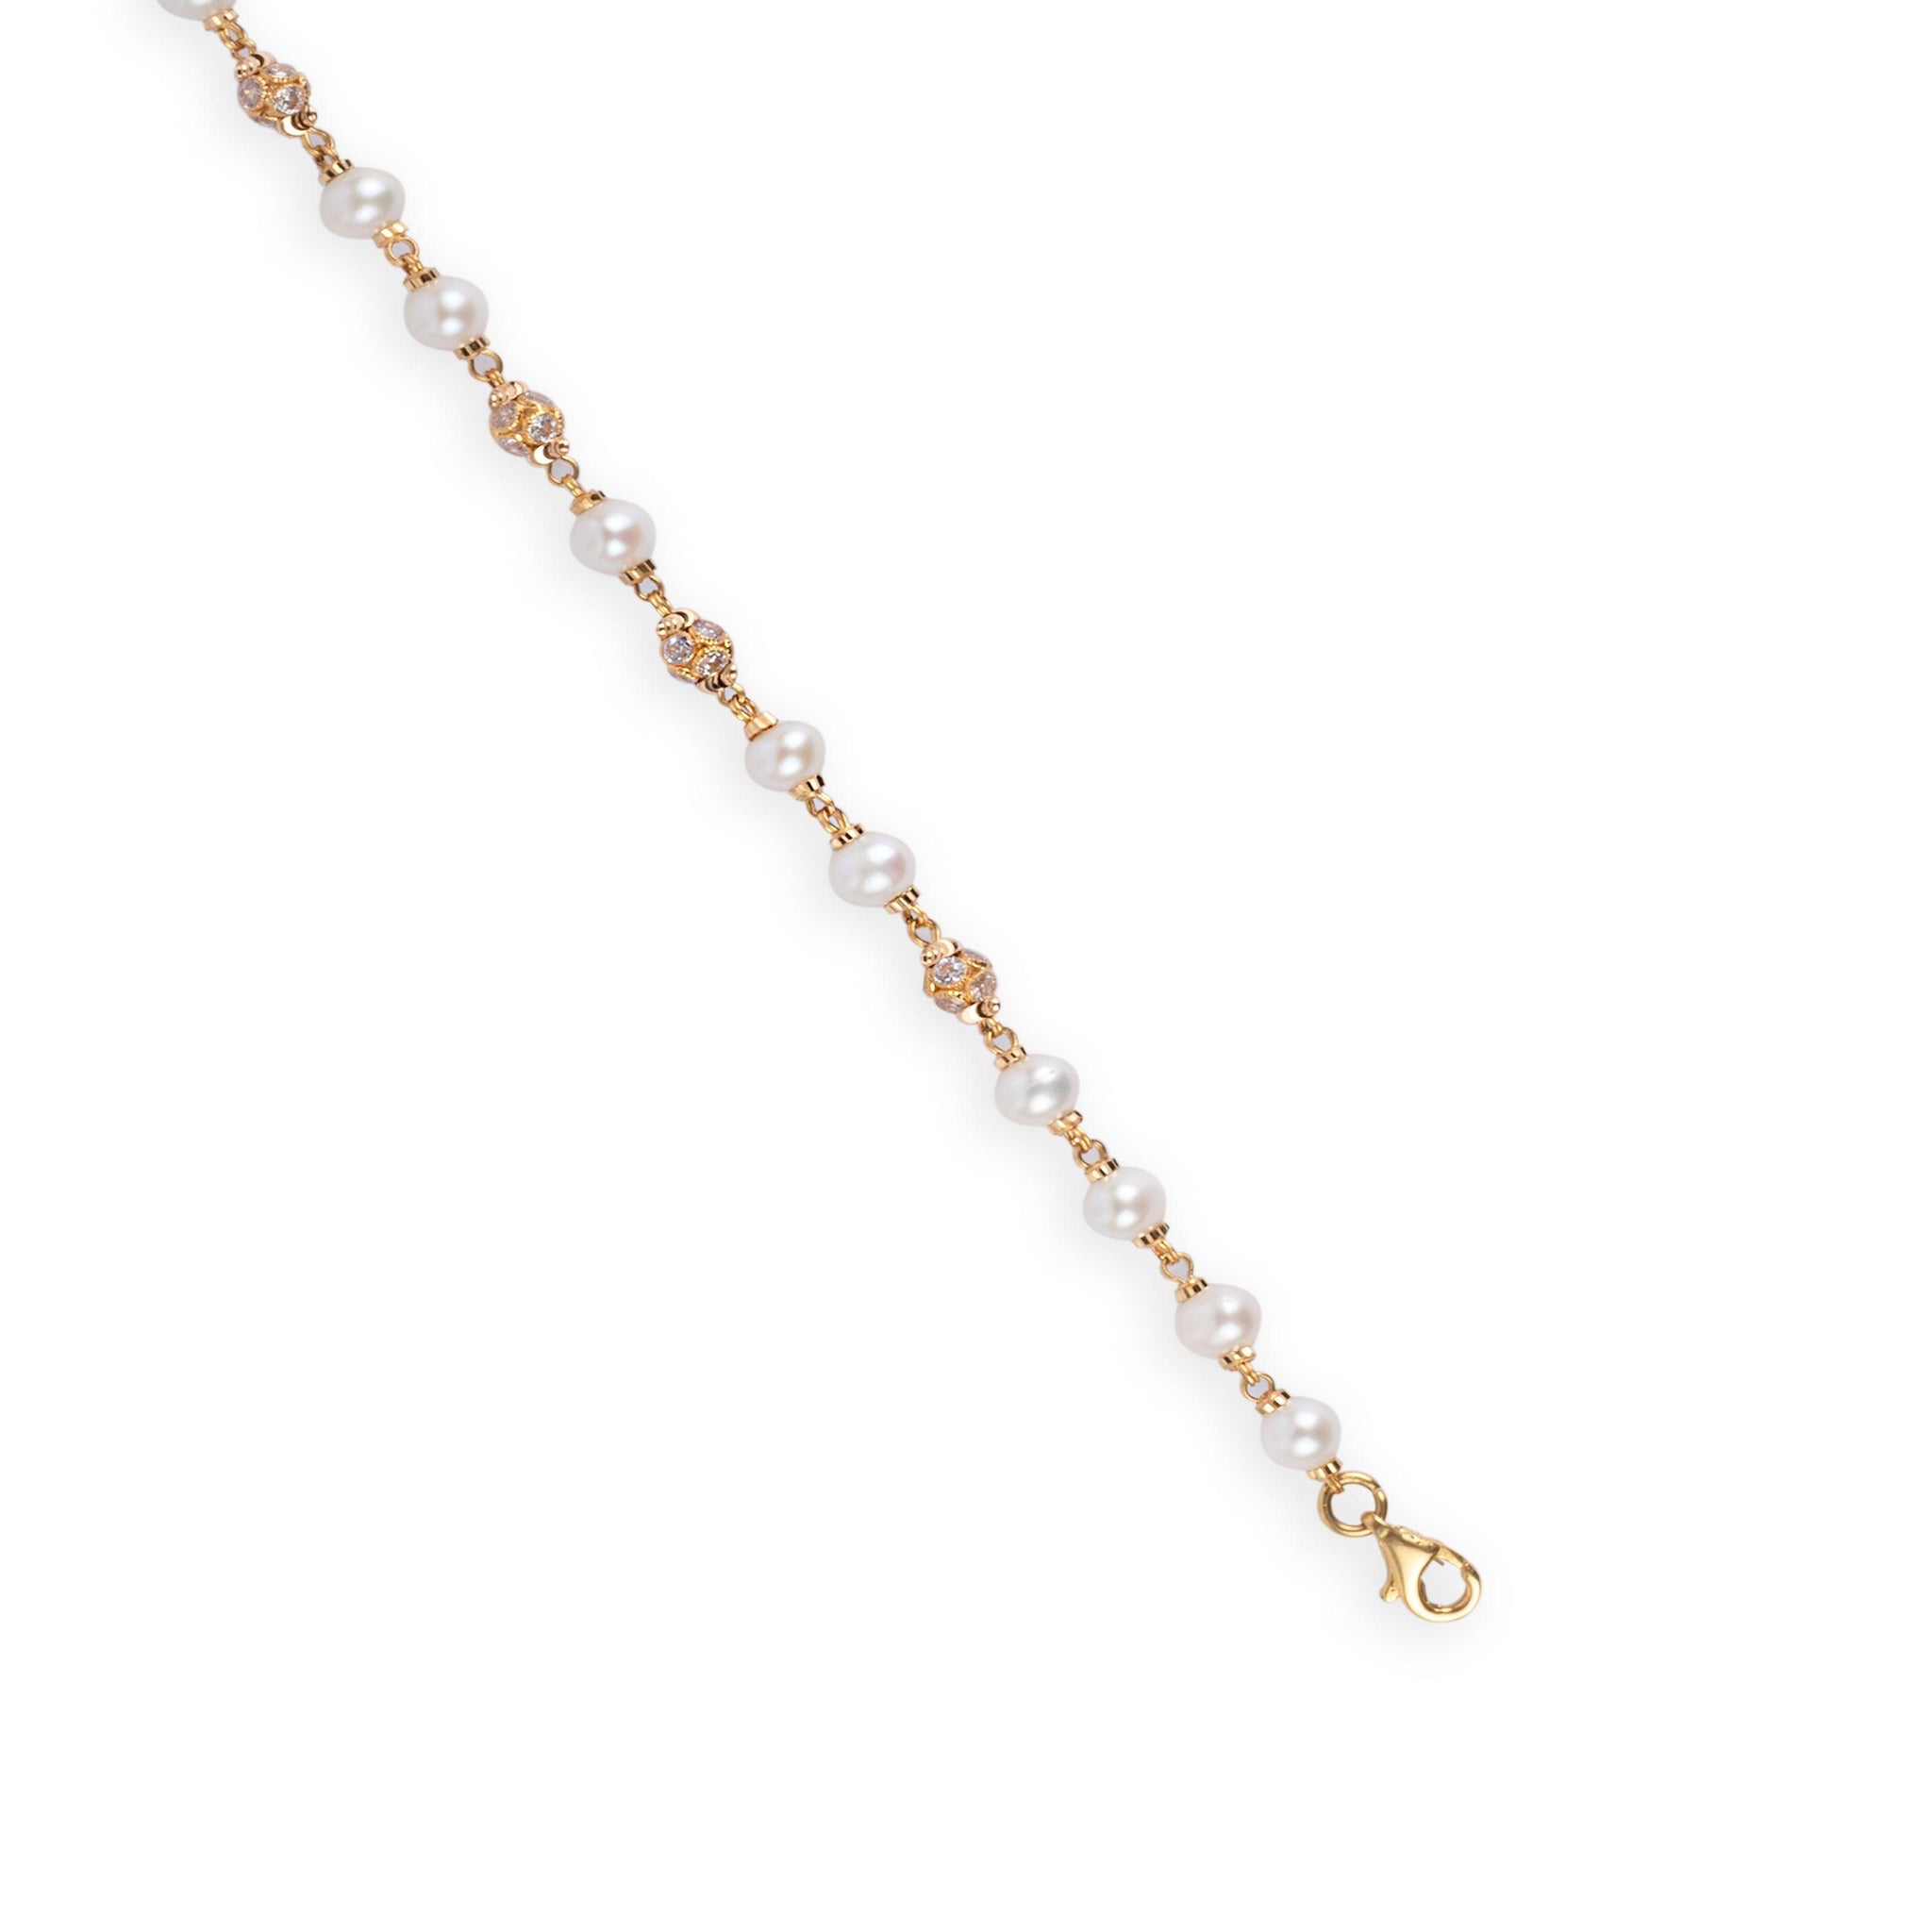 22ct Gold Adjustable Bracelet with Cultured Pearls & Cubic Zirconia Beads with Lobster Clasp (6.2g) LBR-7135